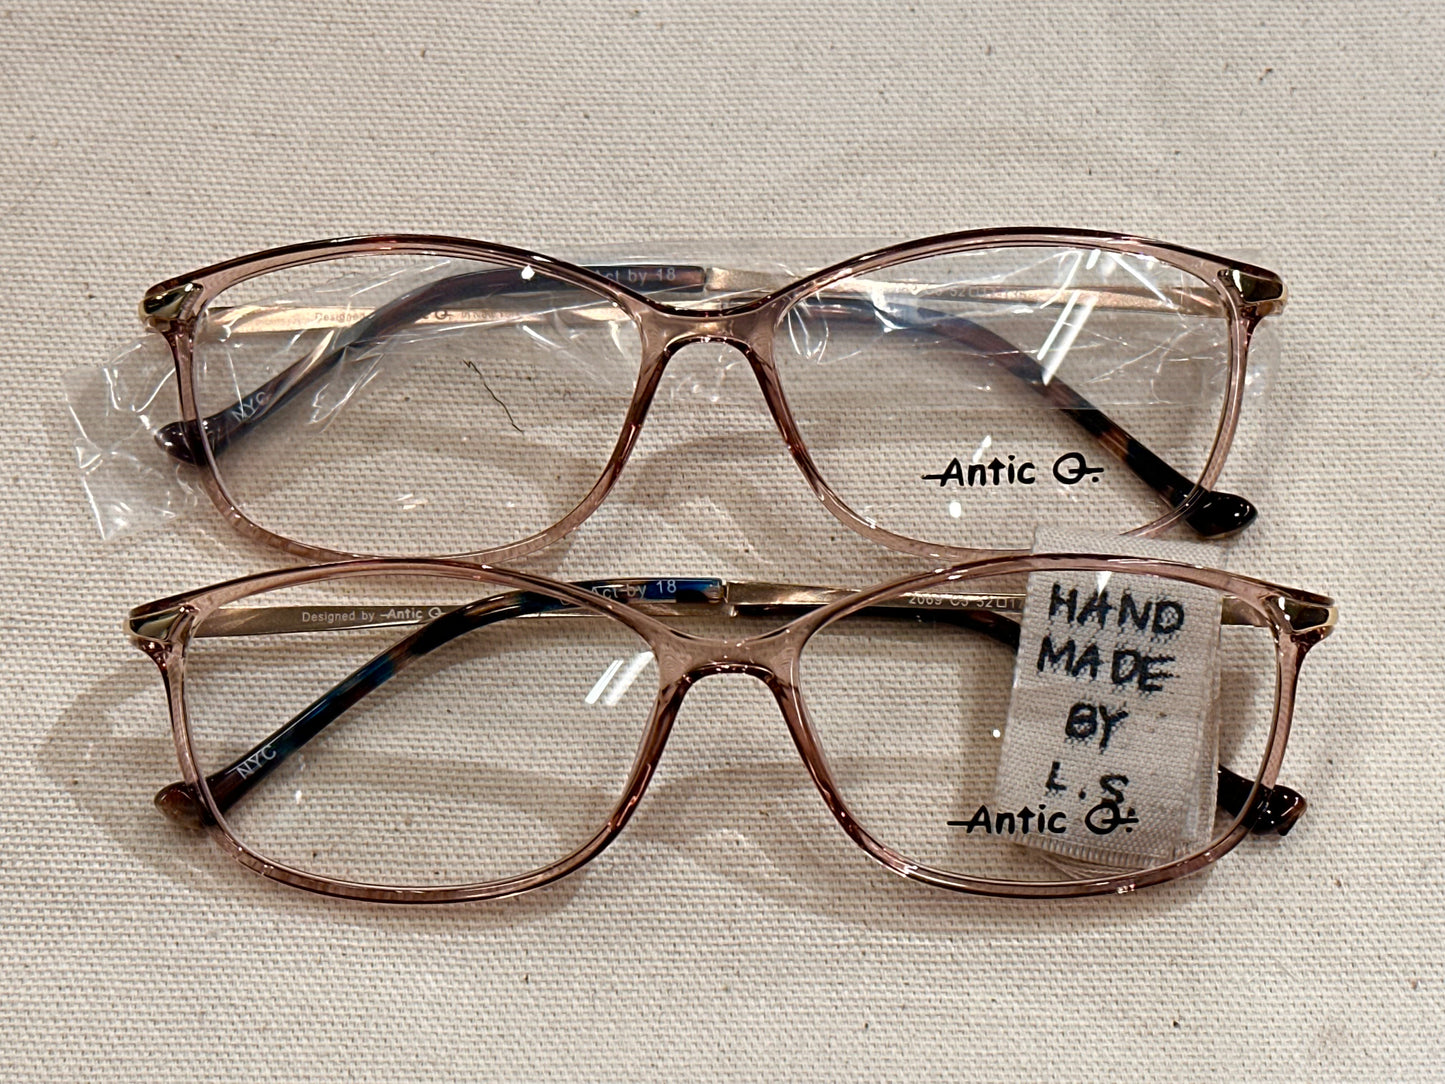 Private Product (2 pairs of "Act by 18" frame, blush pink)